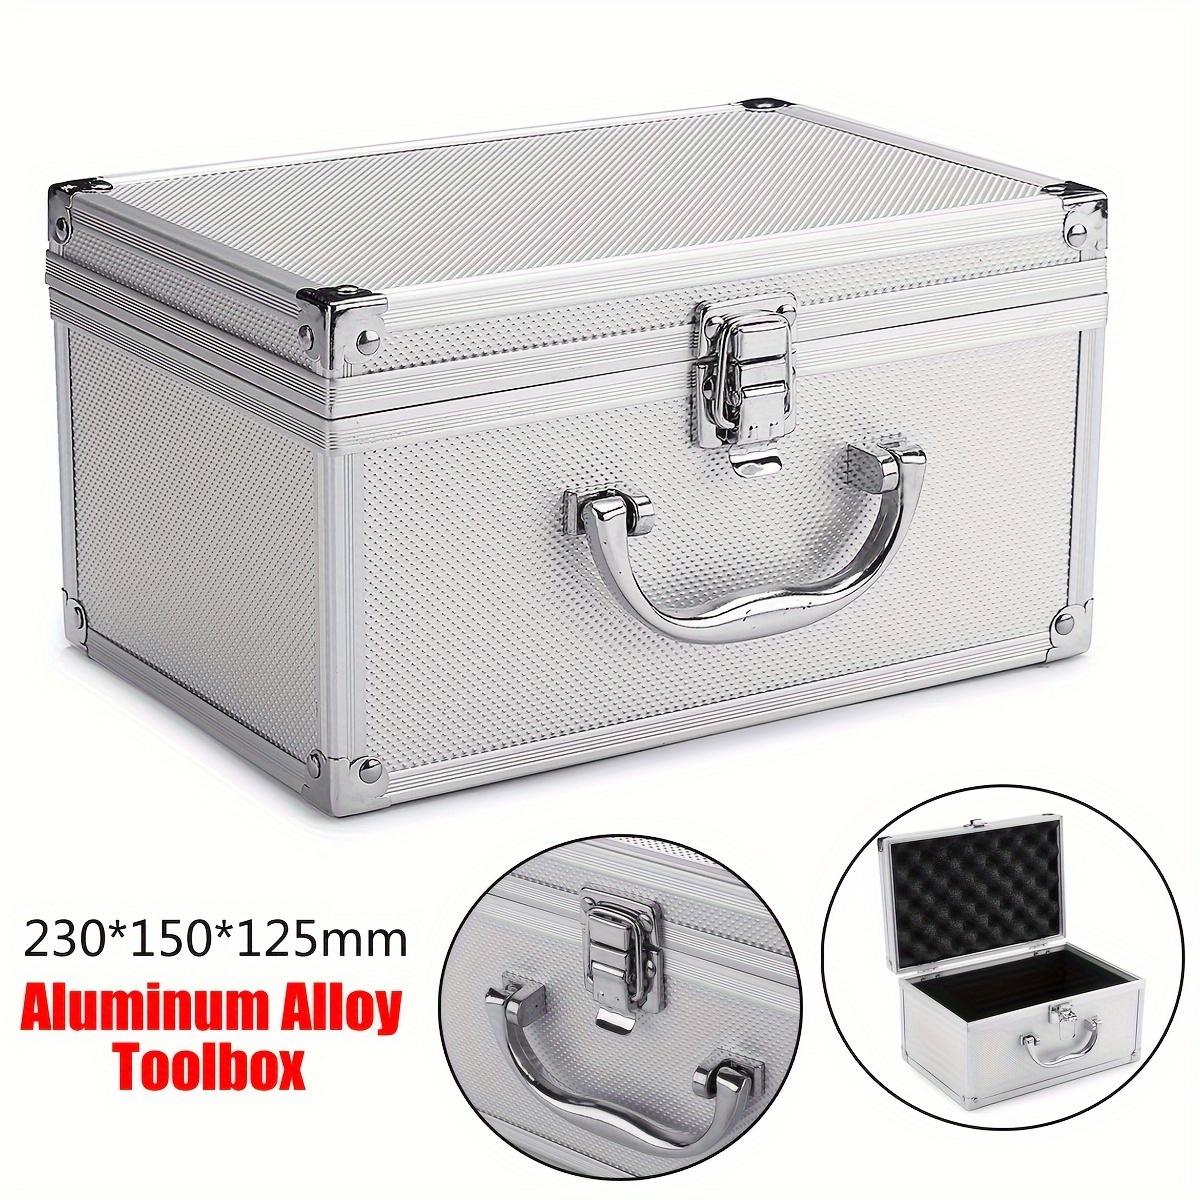 

Aluminum Alloy Storage Box 230x150x125mm - Portable Display Case With Lining For Tools, Instruments, Jewelry, And Documents - Large Capacity Under 3.2 Cubic Feet, Height <27", Lightweight Design